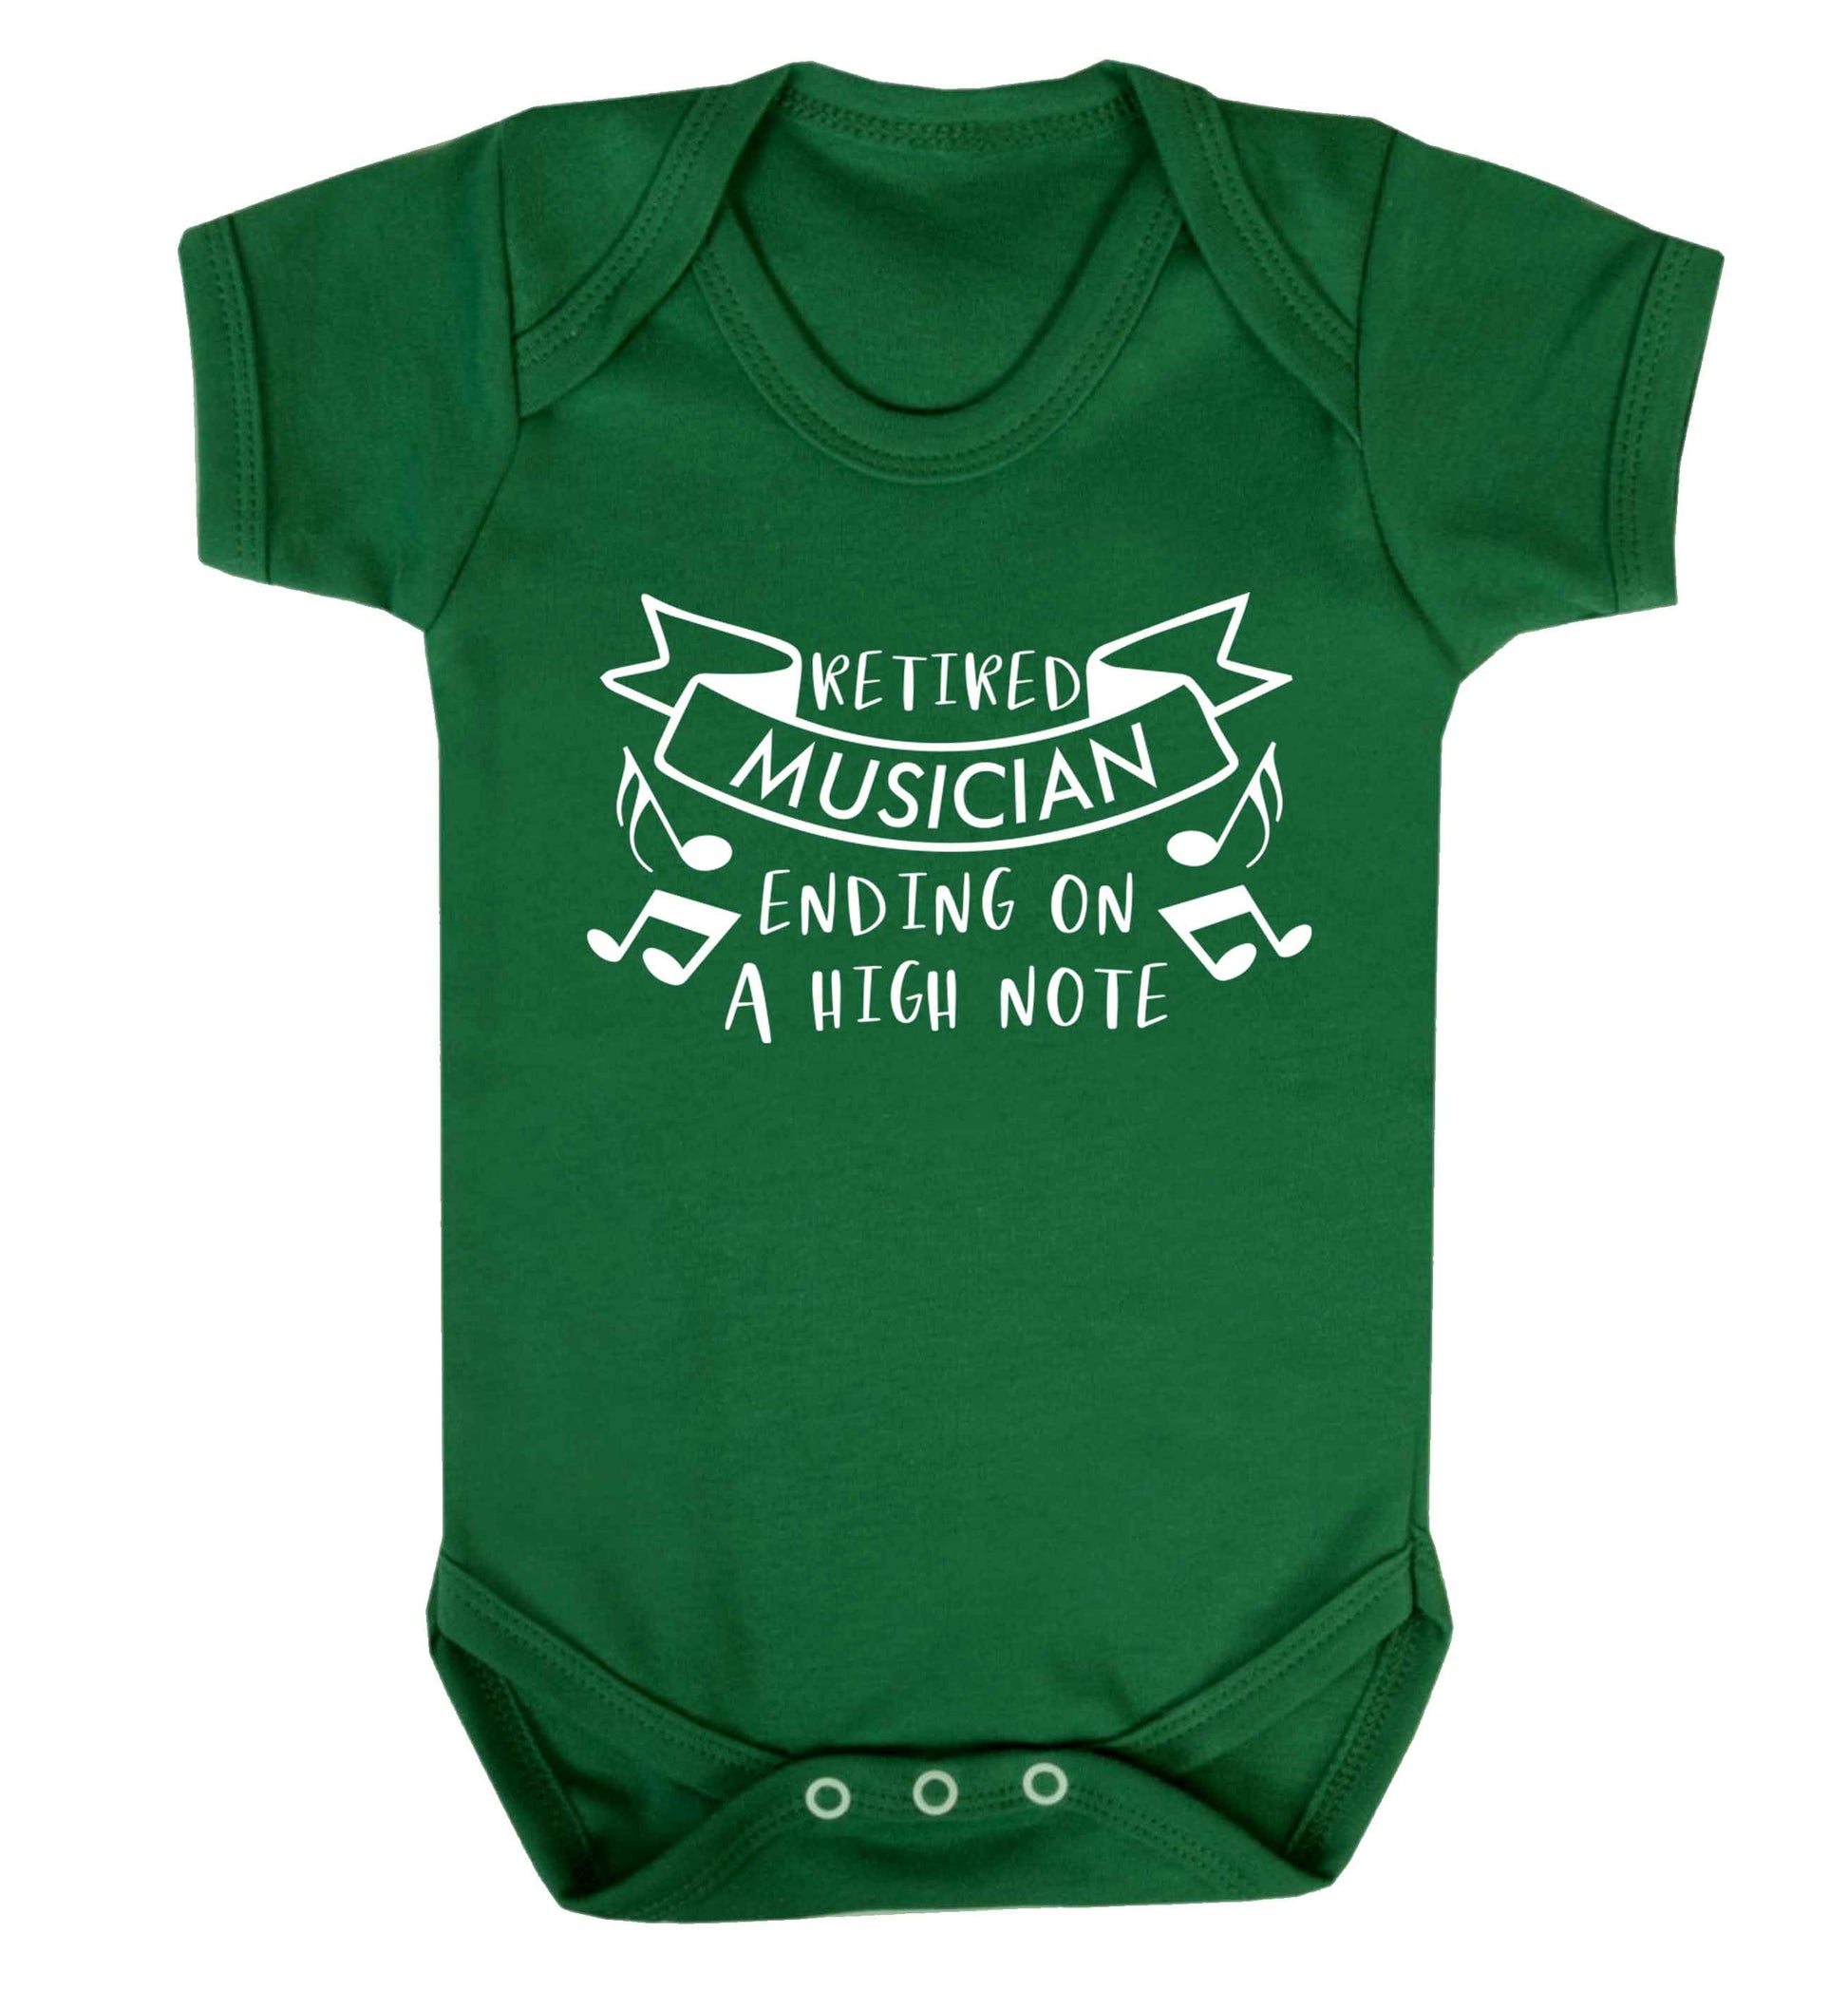 Retired musician ending on a high note Baby Vest green 18-24 months